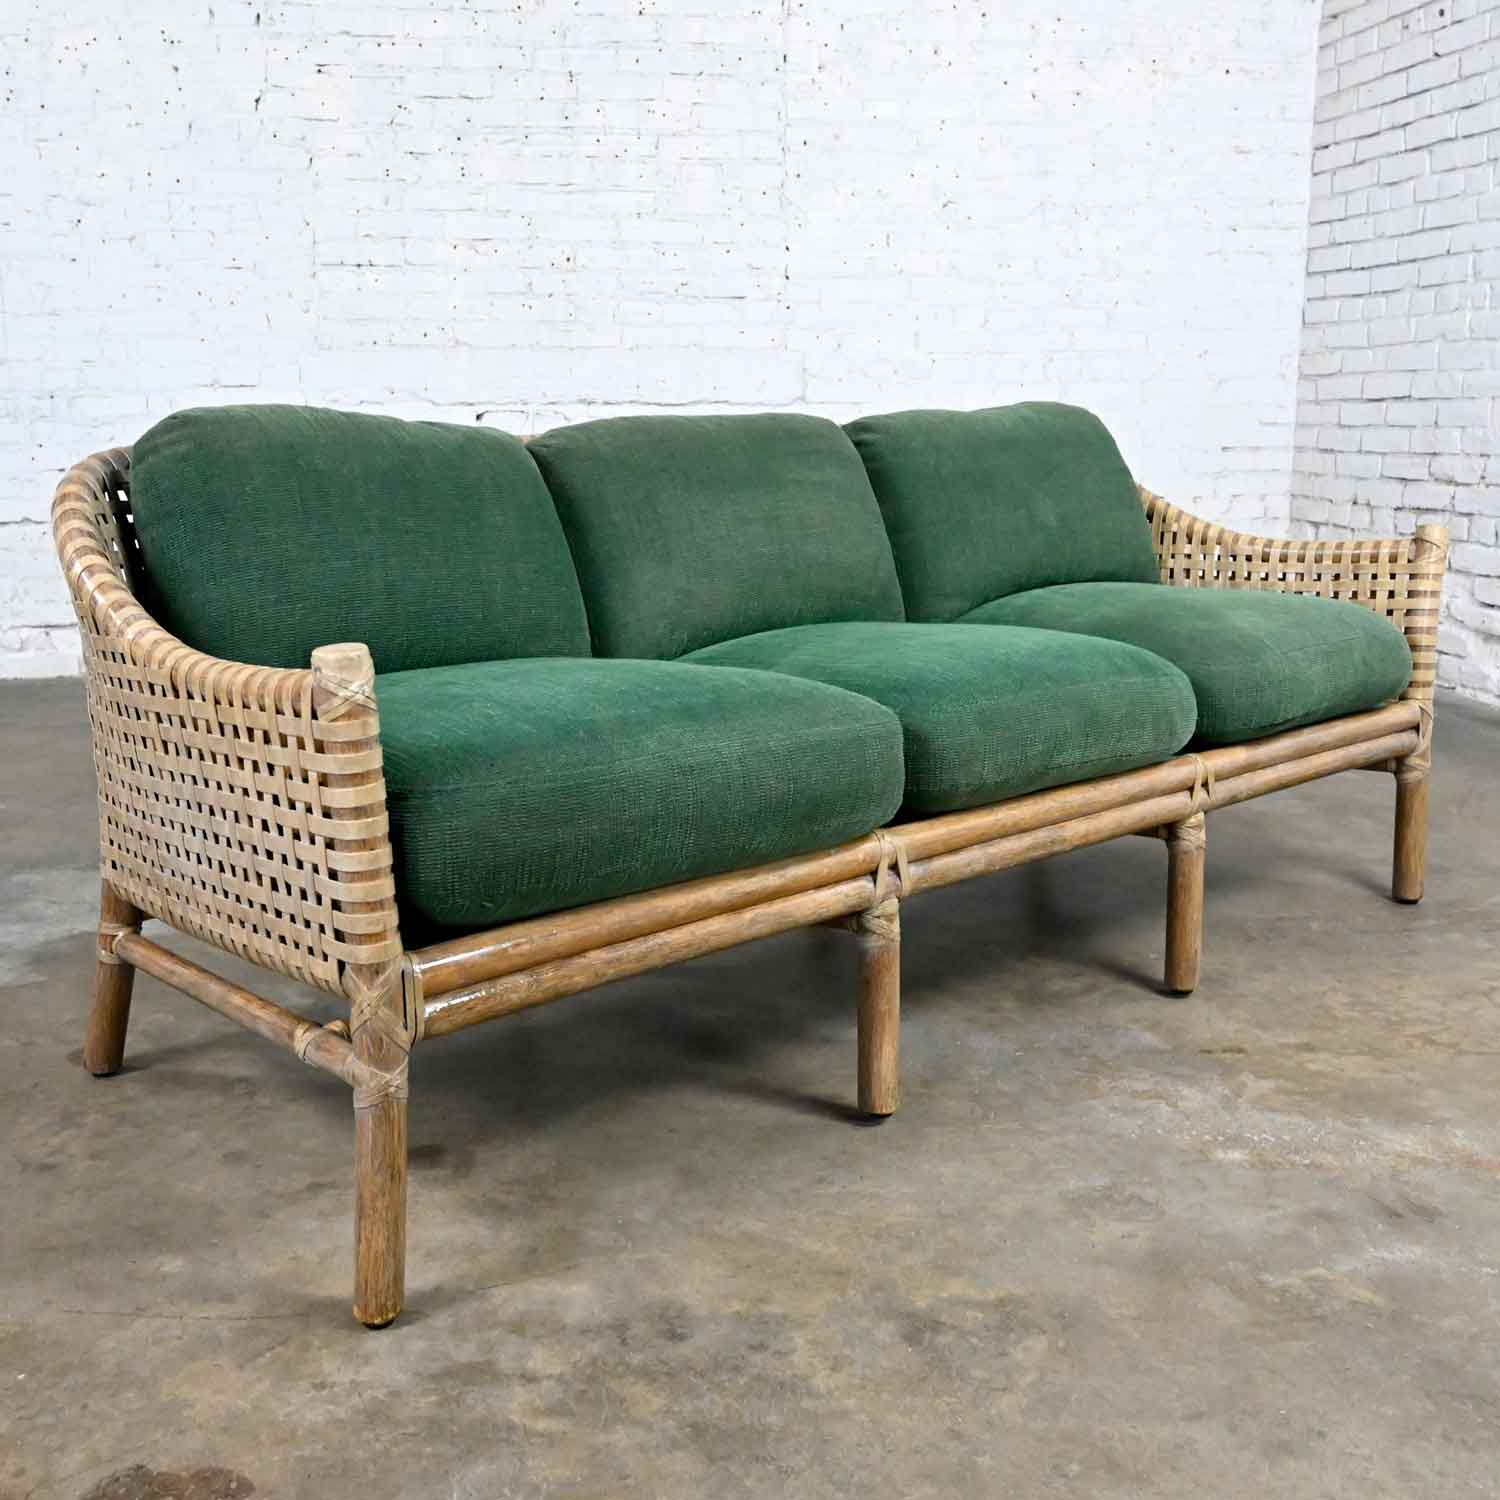 Vintage Organic Modern Rattan & Laced Rawhide Green Chenille Cushion Sofa Settee by McGuire